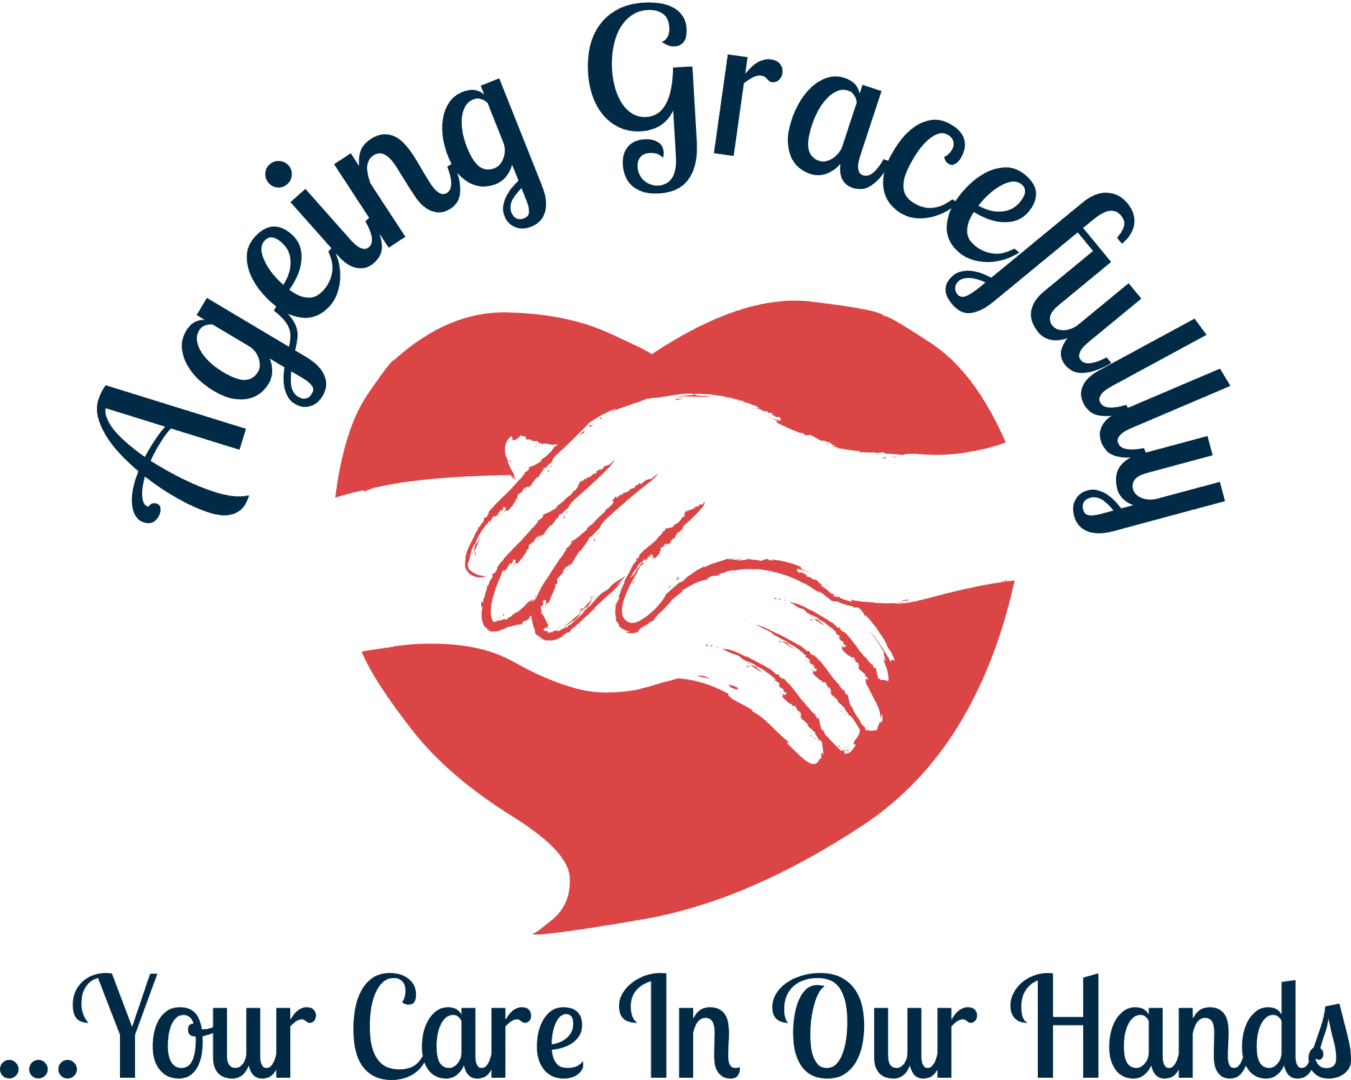 ageing gracefully logo your care in our hands